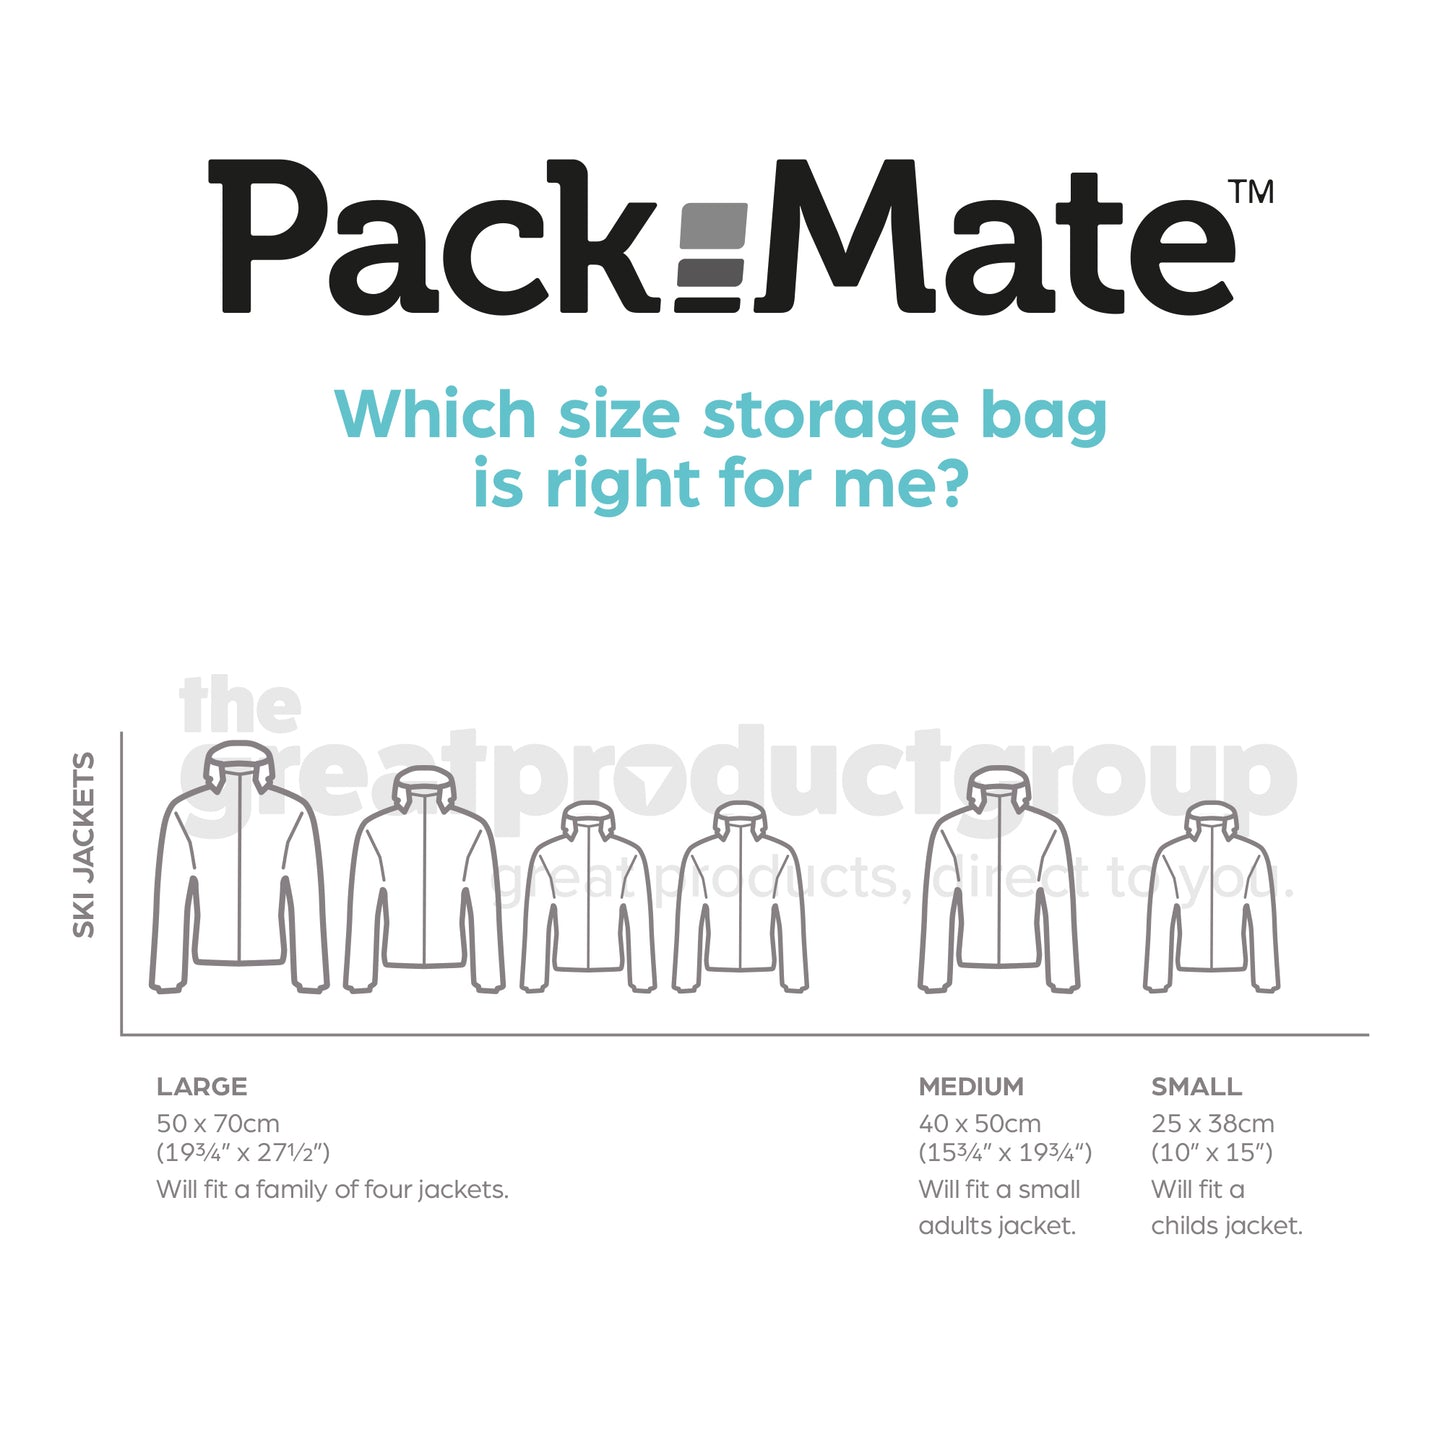 Packmate 8pc Travel Roll Storage Bag Set (2 Small, 4 Medium, 2 Large)